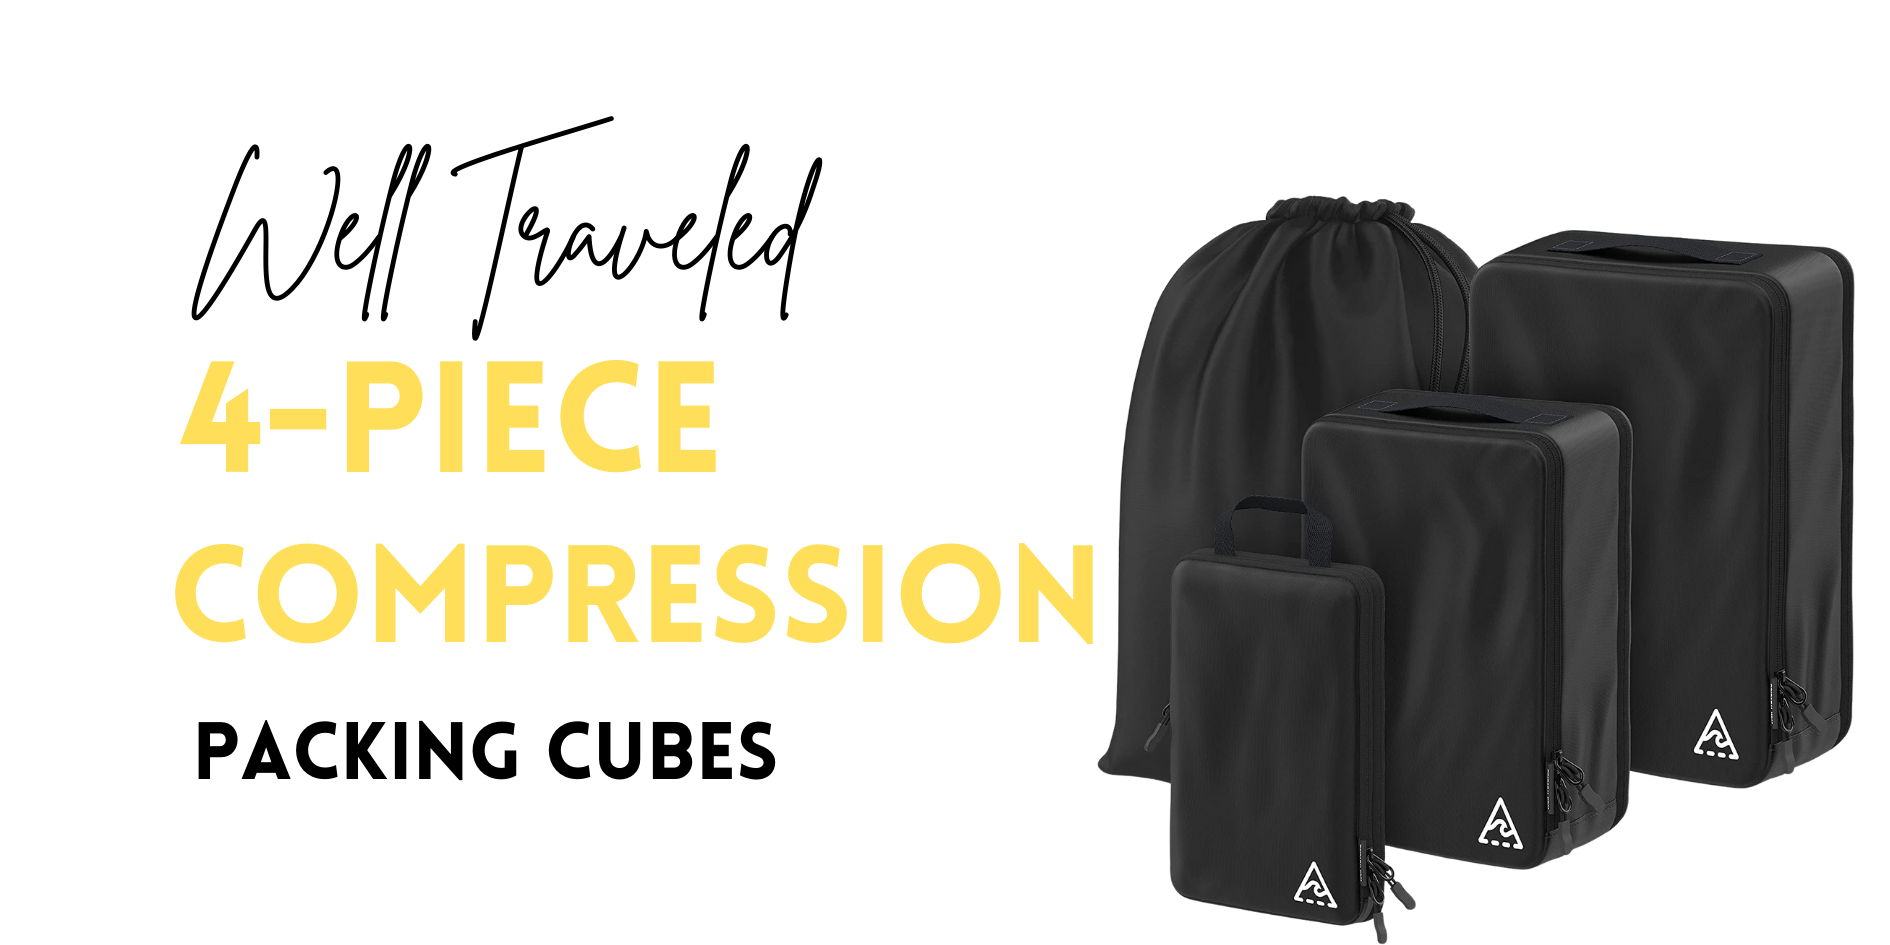 Well Traveled 4-Piece Compression Packing Cubes